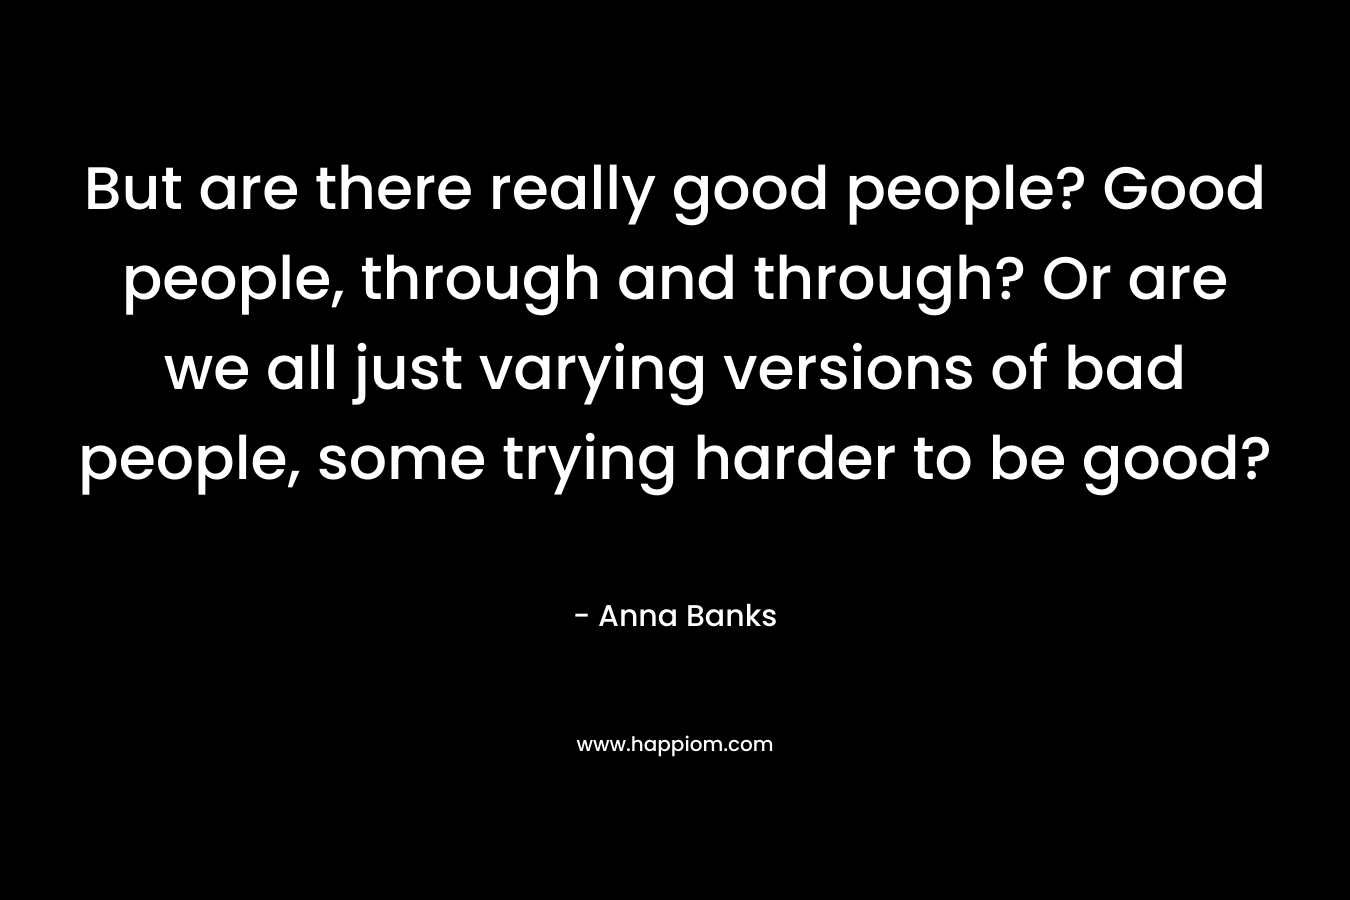 But are there really good people? Good people, through and through? Or are we all just varying versions of bad people, some trying harder to be good?